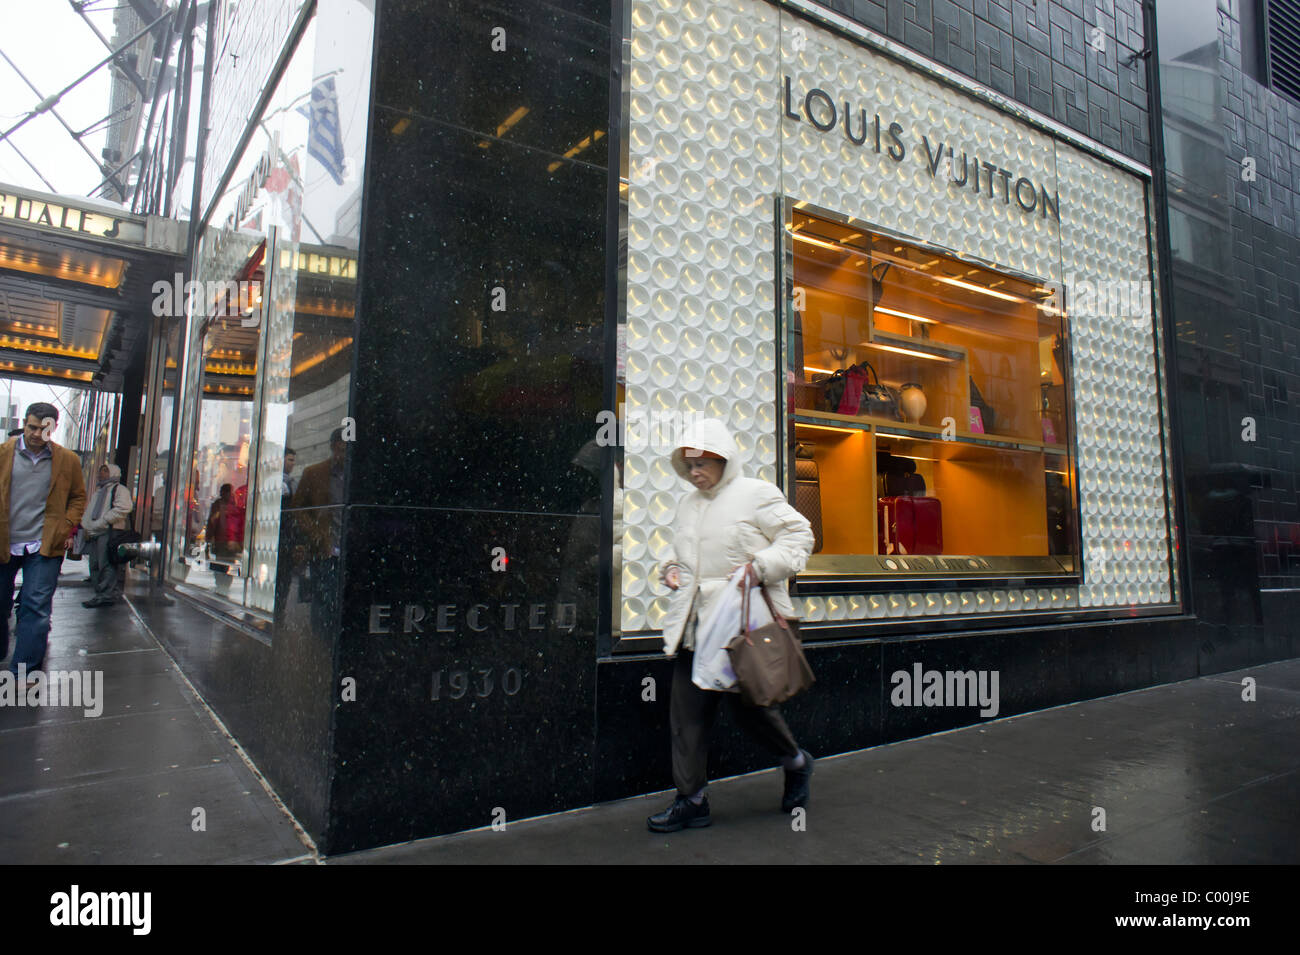 Louis Vuitton McLean Tysons Corner Bloomingdale's store, United States